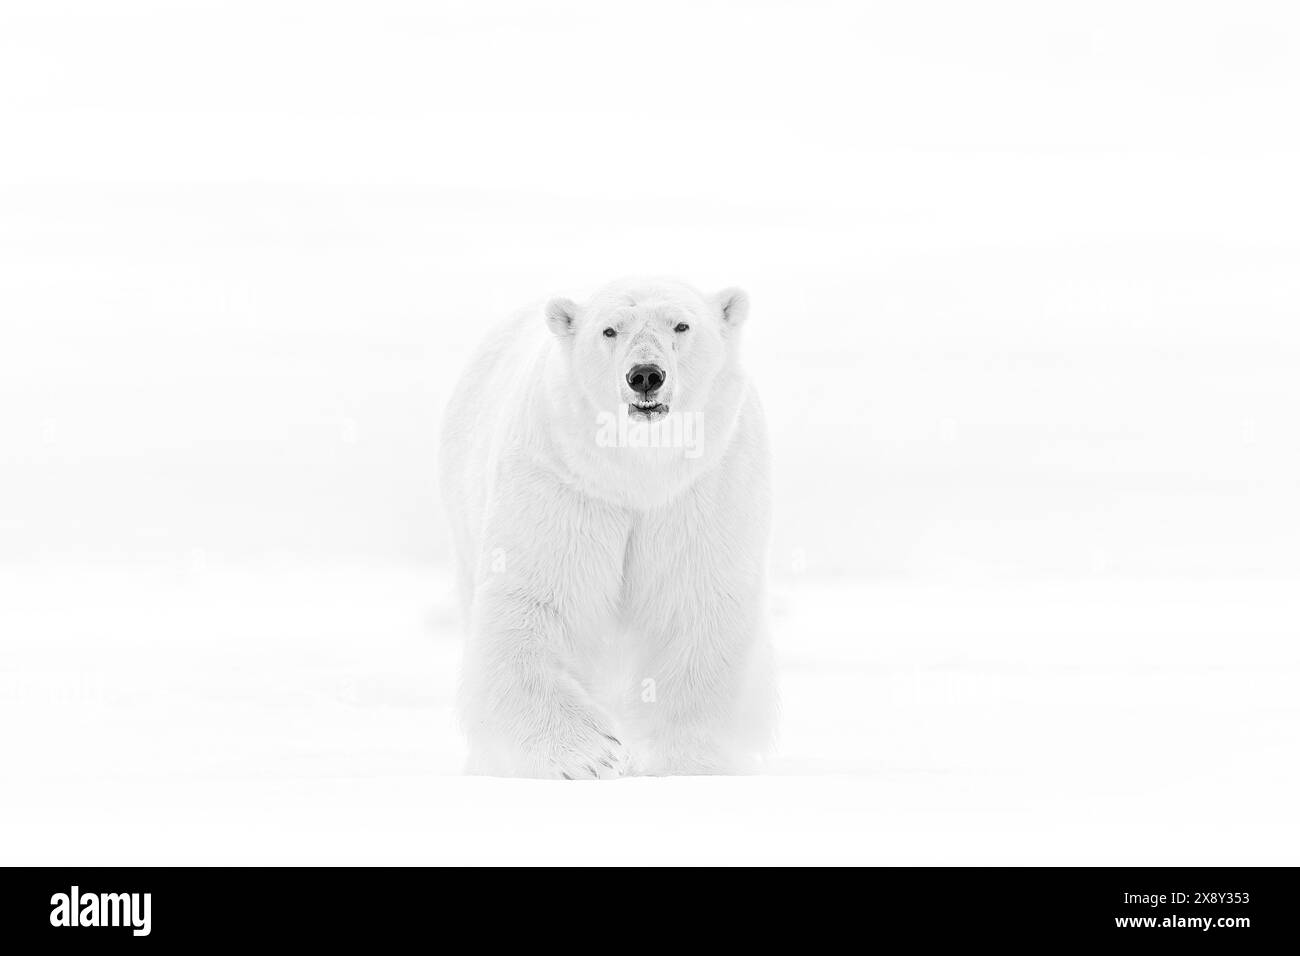 Art wildllife. Black and white art photo of two polar bears fighting on drifting ice in Arctic Svalbard. Animal fight in white snow. Stock Photo